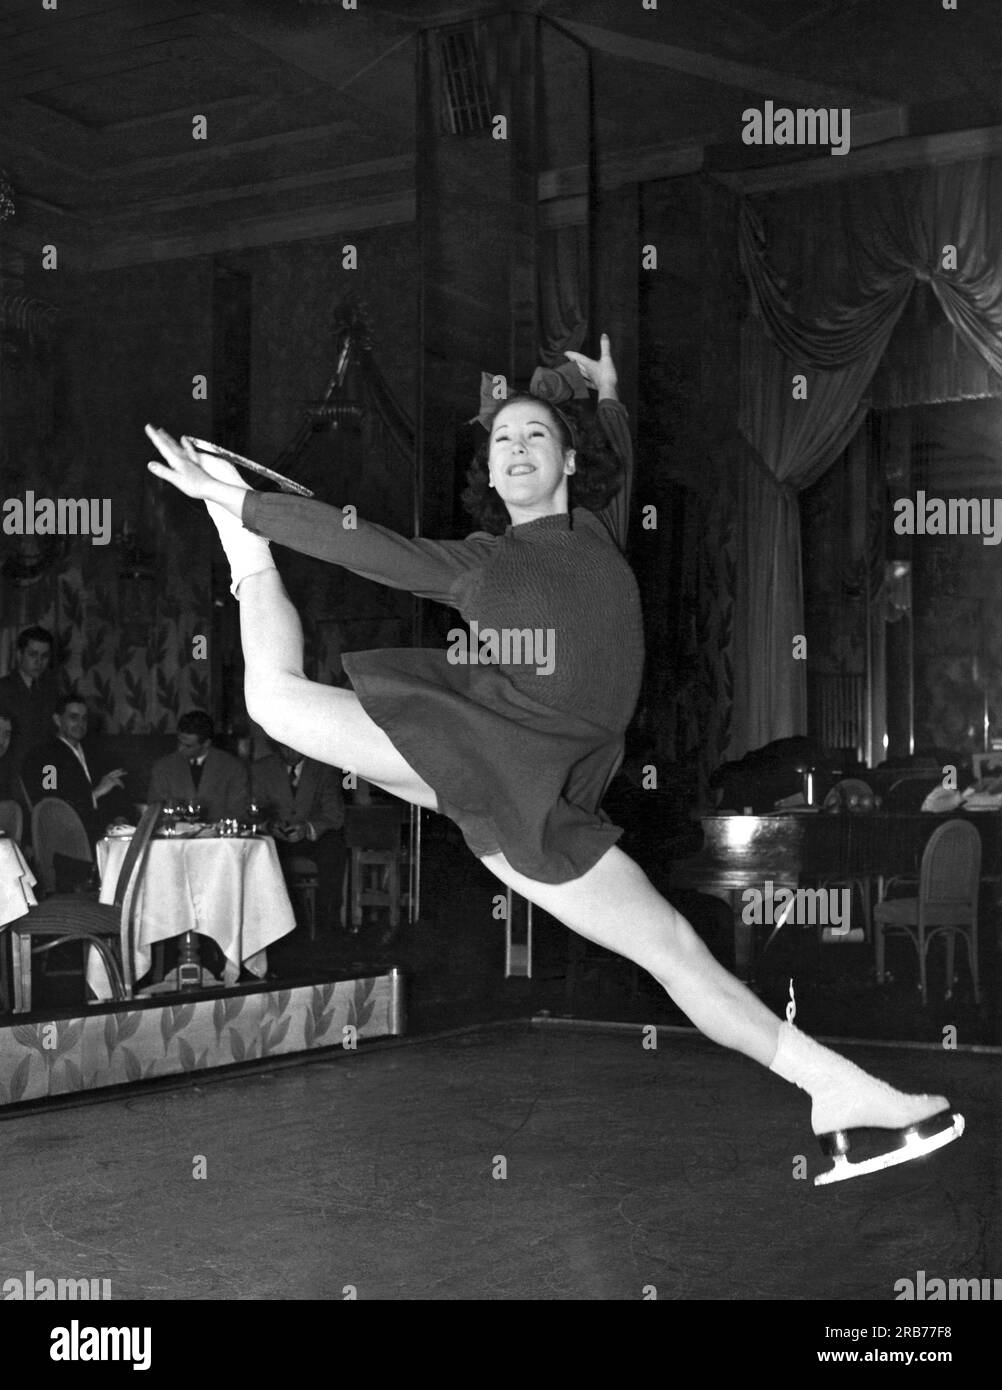 New York, New York:  c. 1940  A new trend in night club entertainment: ice skating!  This girl is showing how skillful she is to an admiring audience. Stock Photo